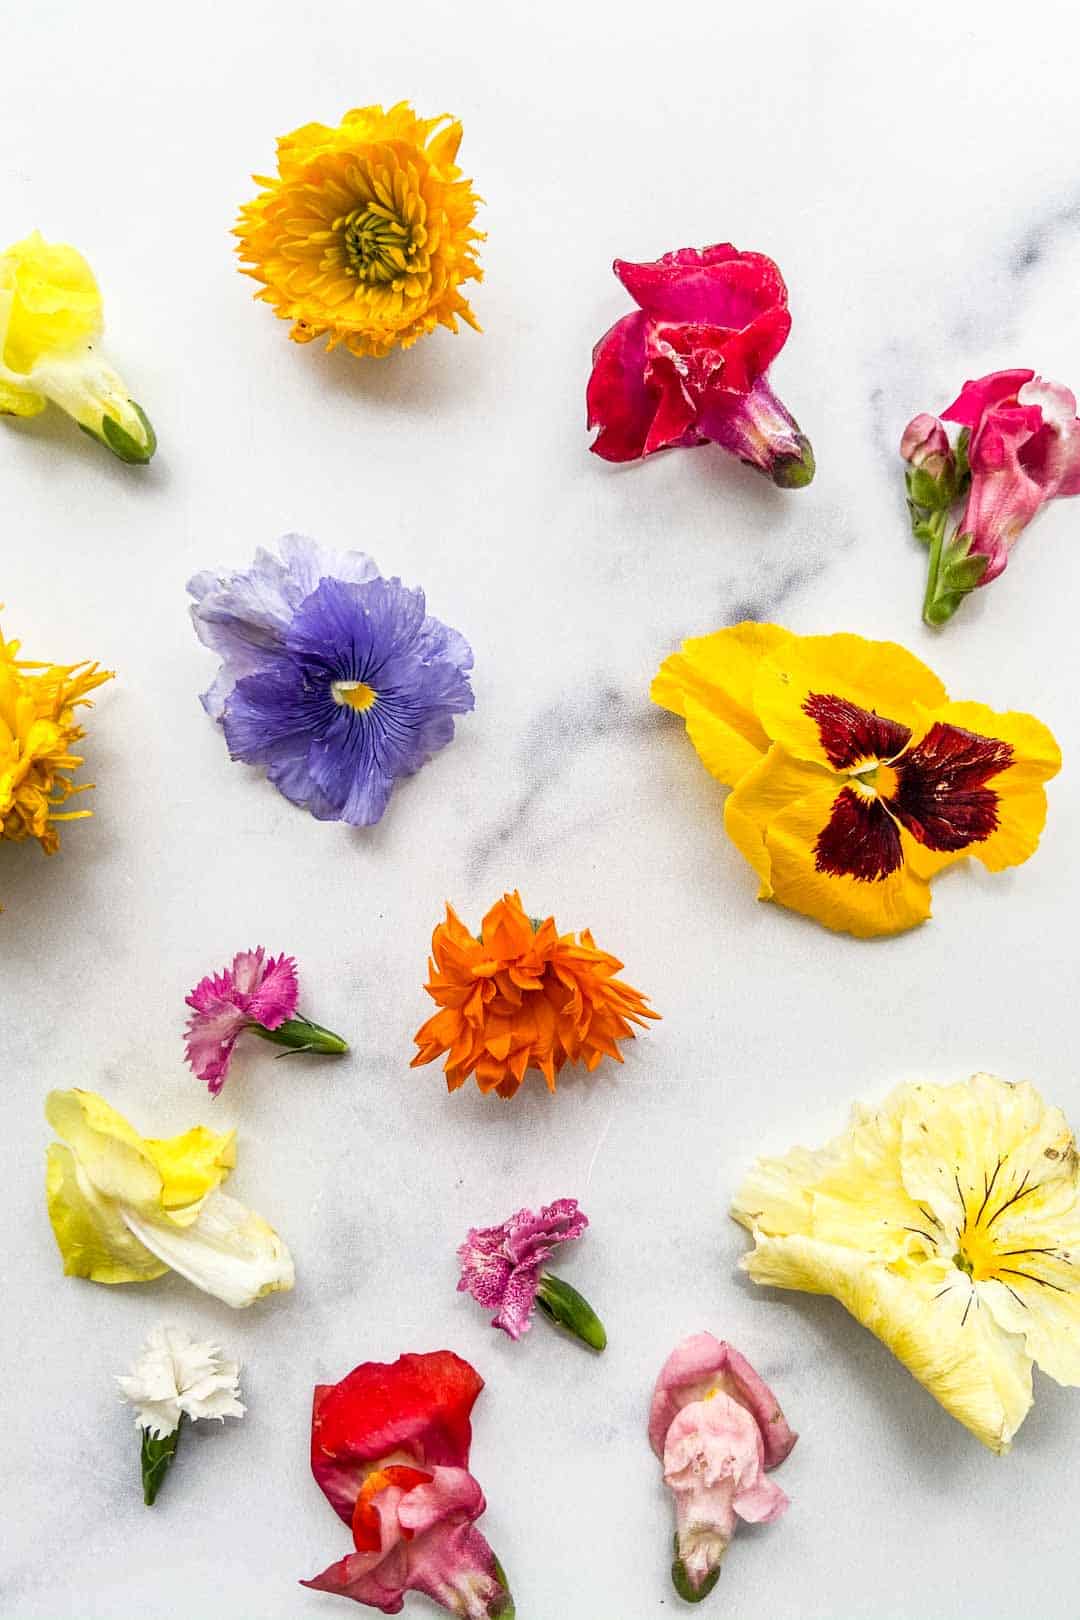 How to Dry Edible Flowers: 7 Steps (with Pictures) - wikiHow Life